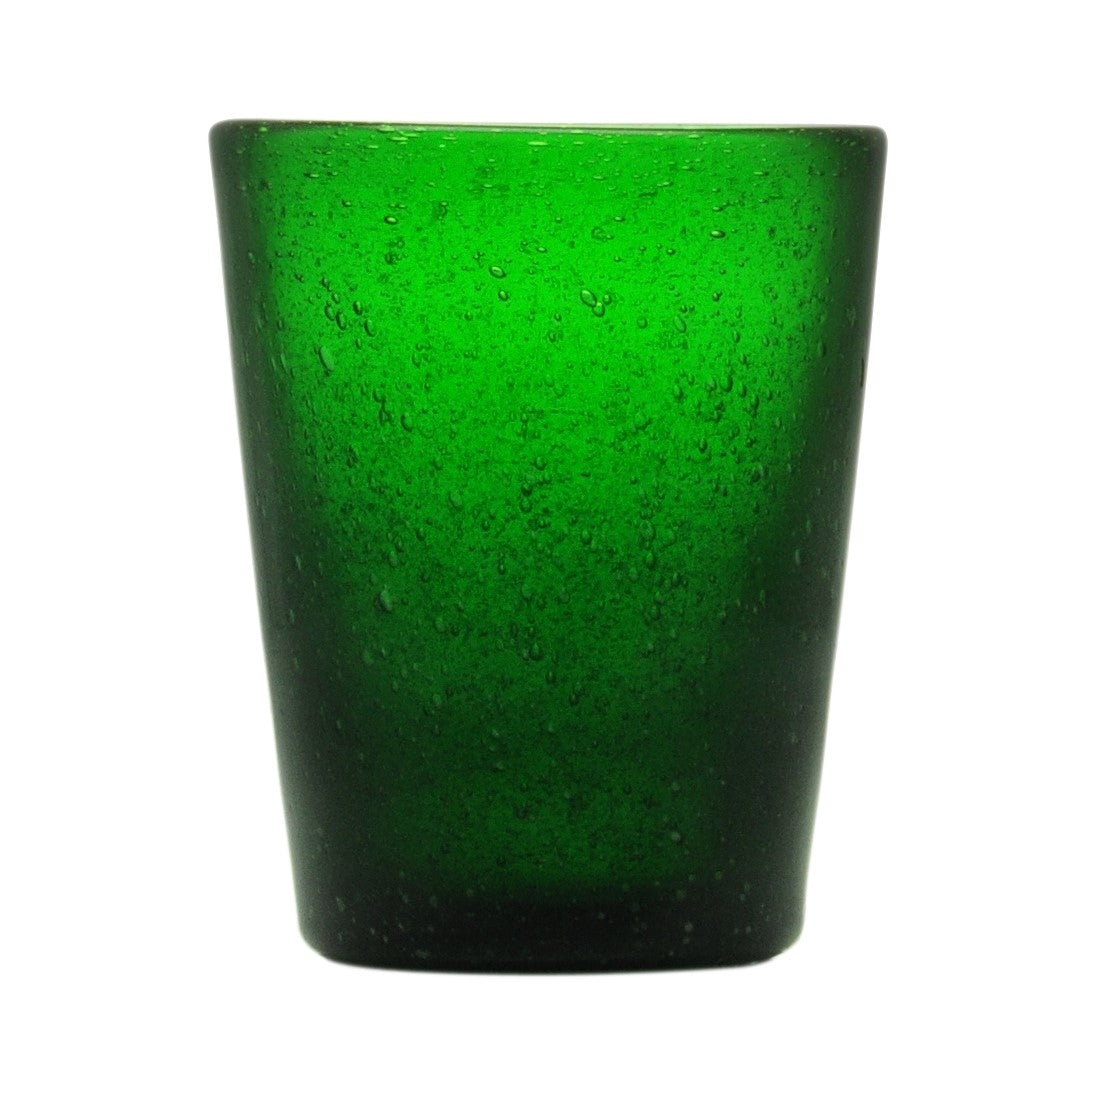 Cheerful, versatile coloured drinking glasses from Memento in Italy. For summer entertaining and everyday use. Decorative bubbles in the glass itself. Colour: Emerald